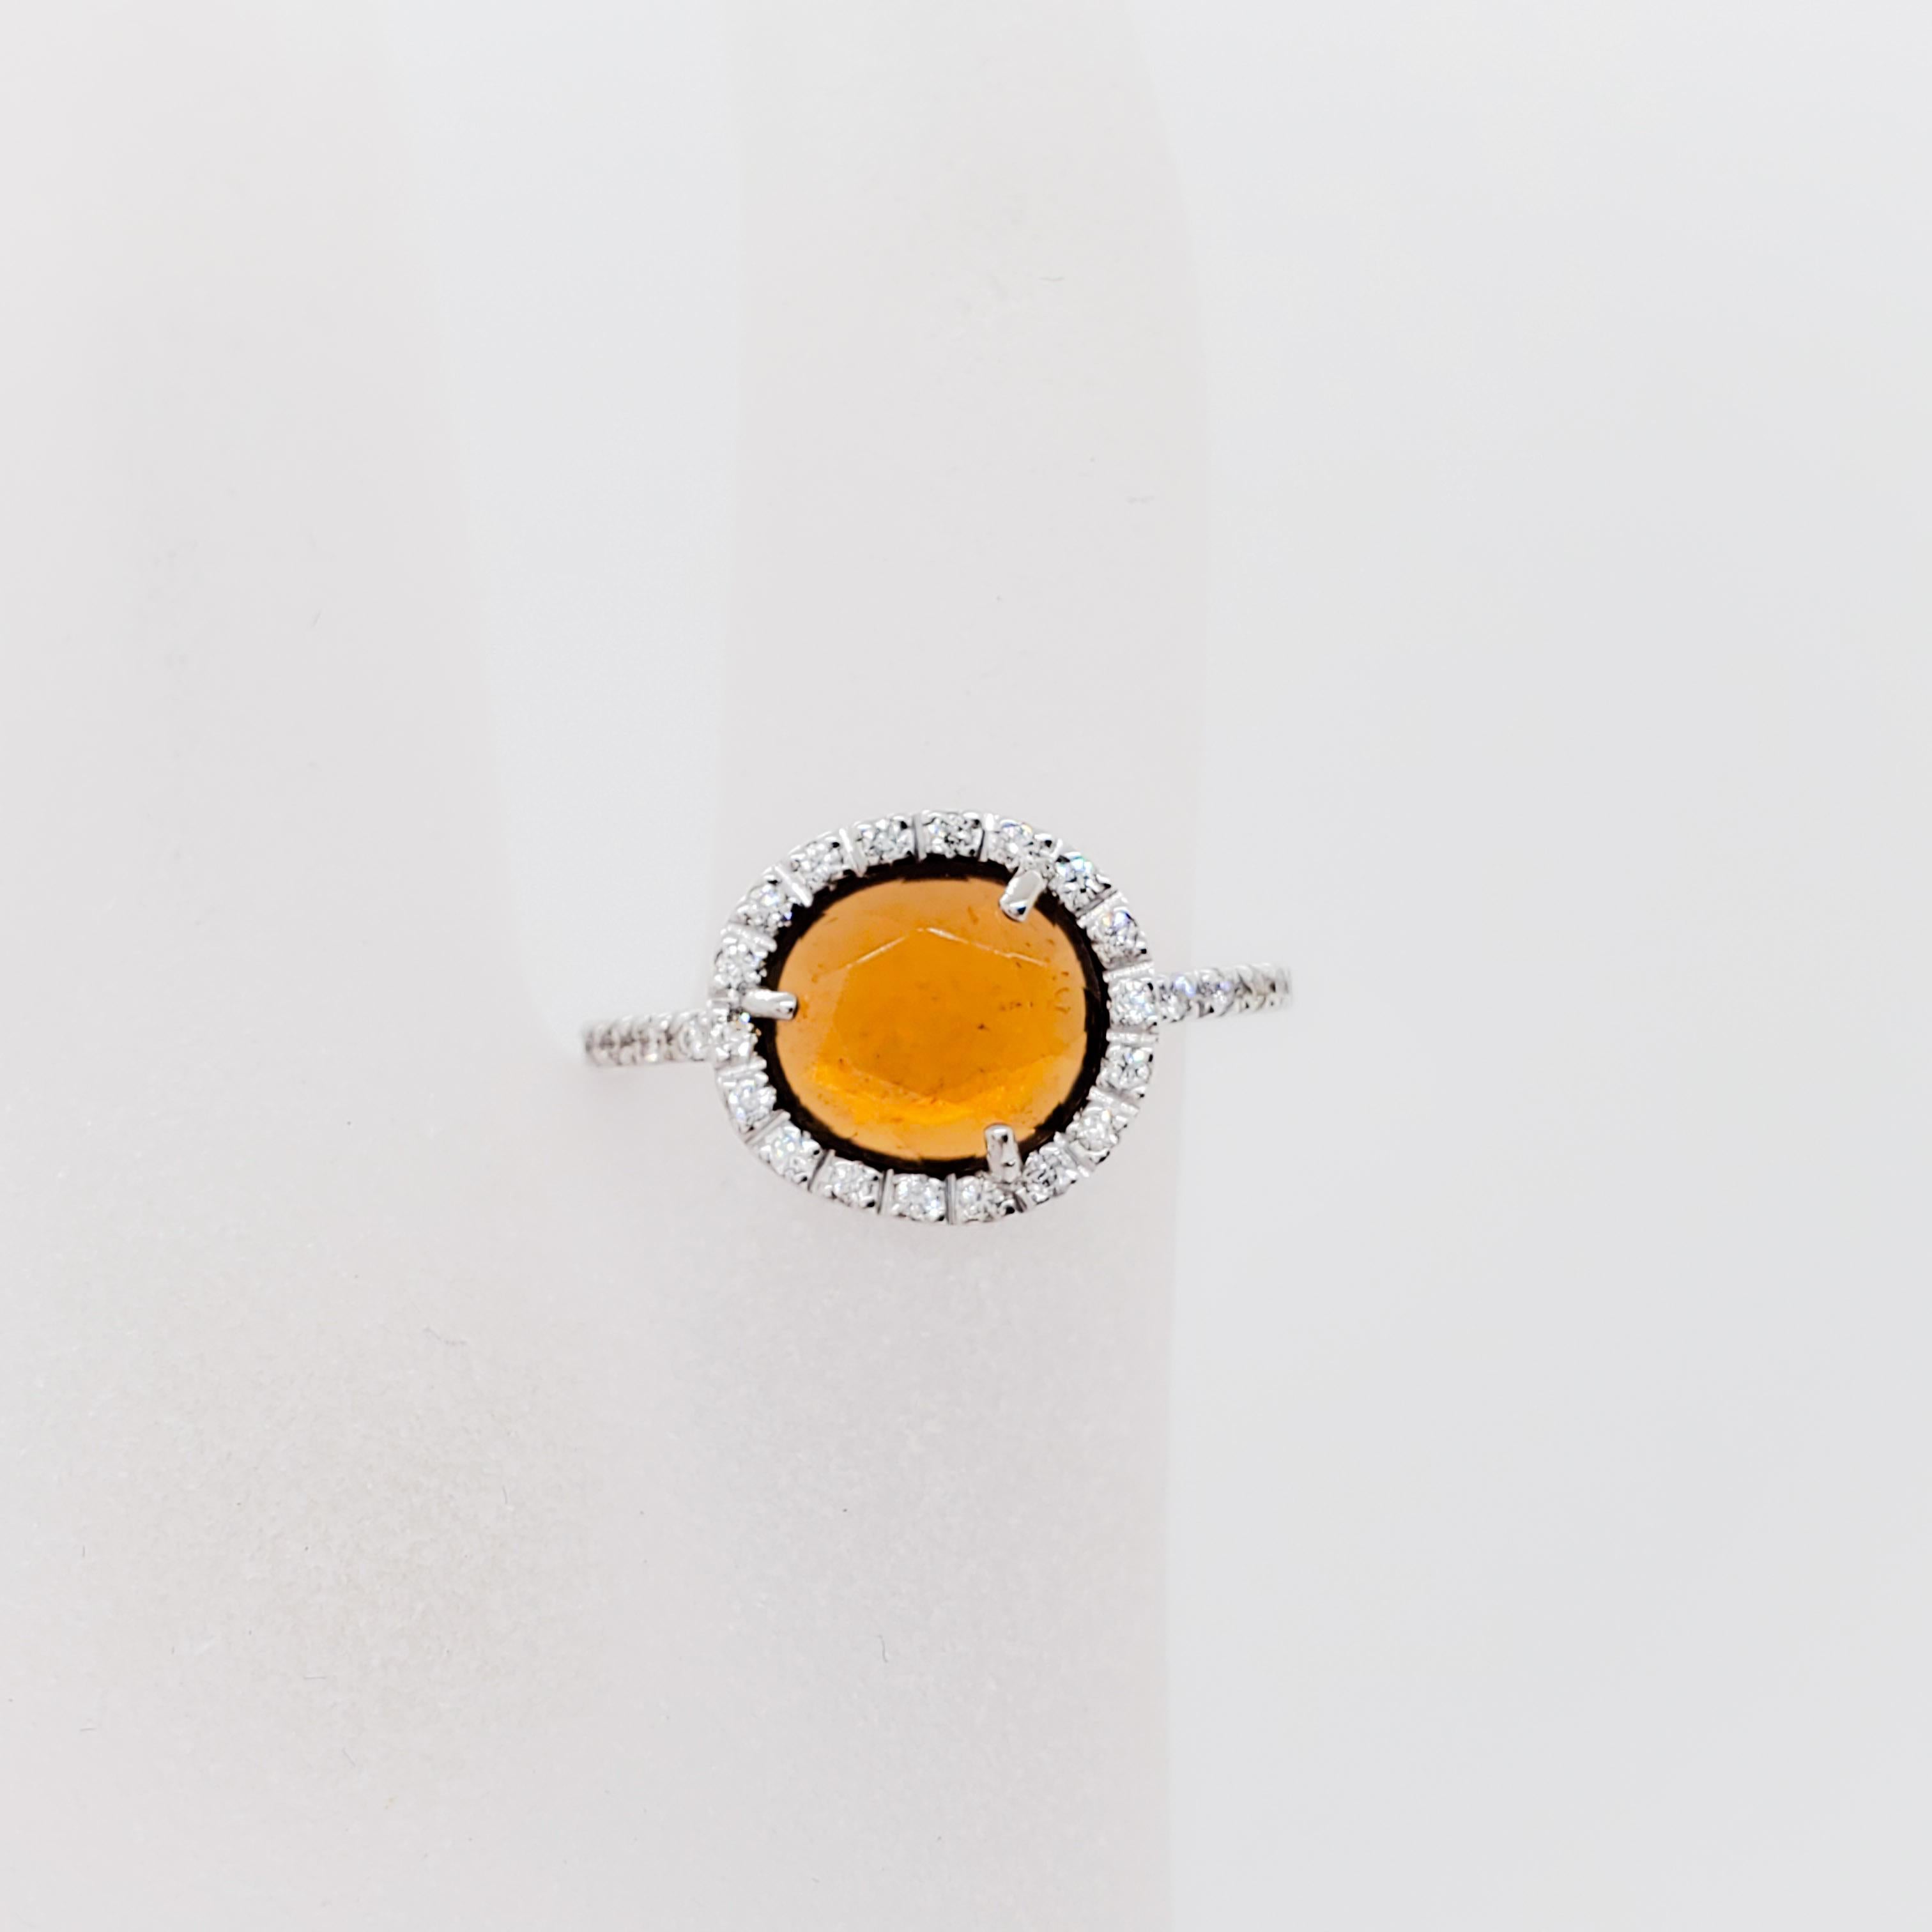 Gorgeous Pomellato cocktail ring featuring 0.75 ct. hessonite garnet and 0.15 ct. white diamond round ring in a handmade 18k white gold mounting.  Ring size 5.25.  Dainty and luxurious.